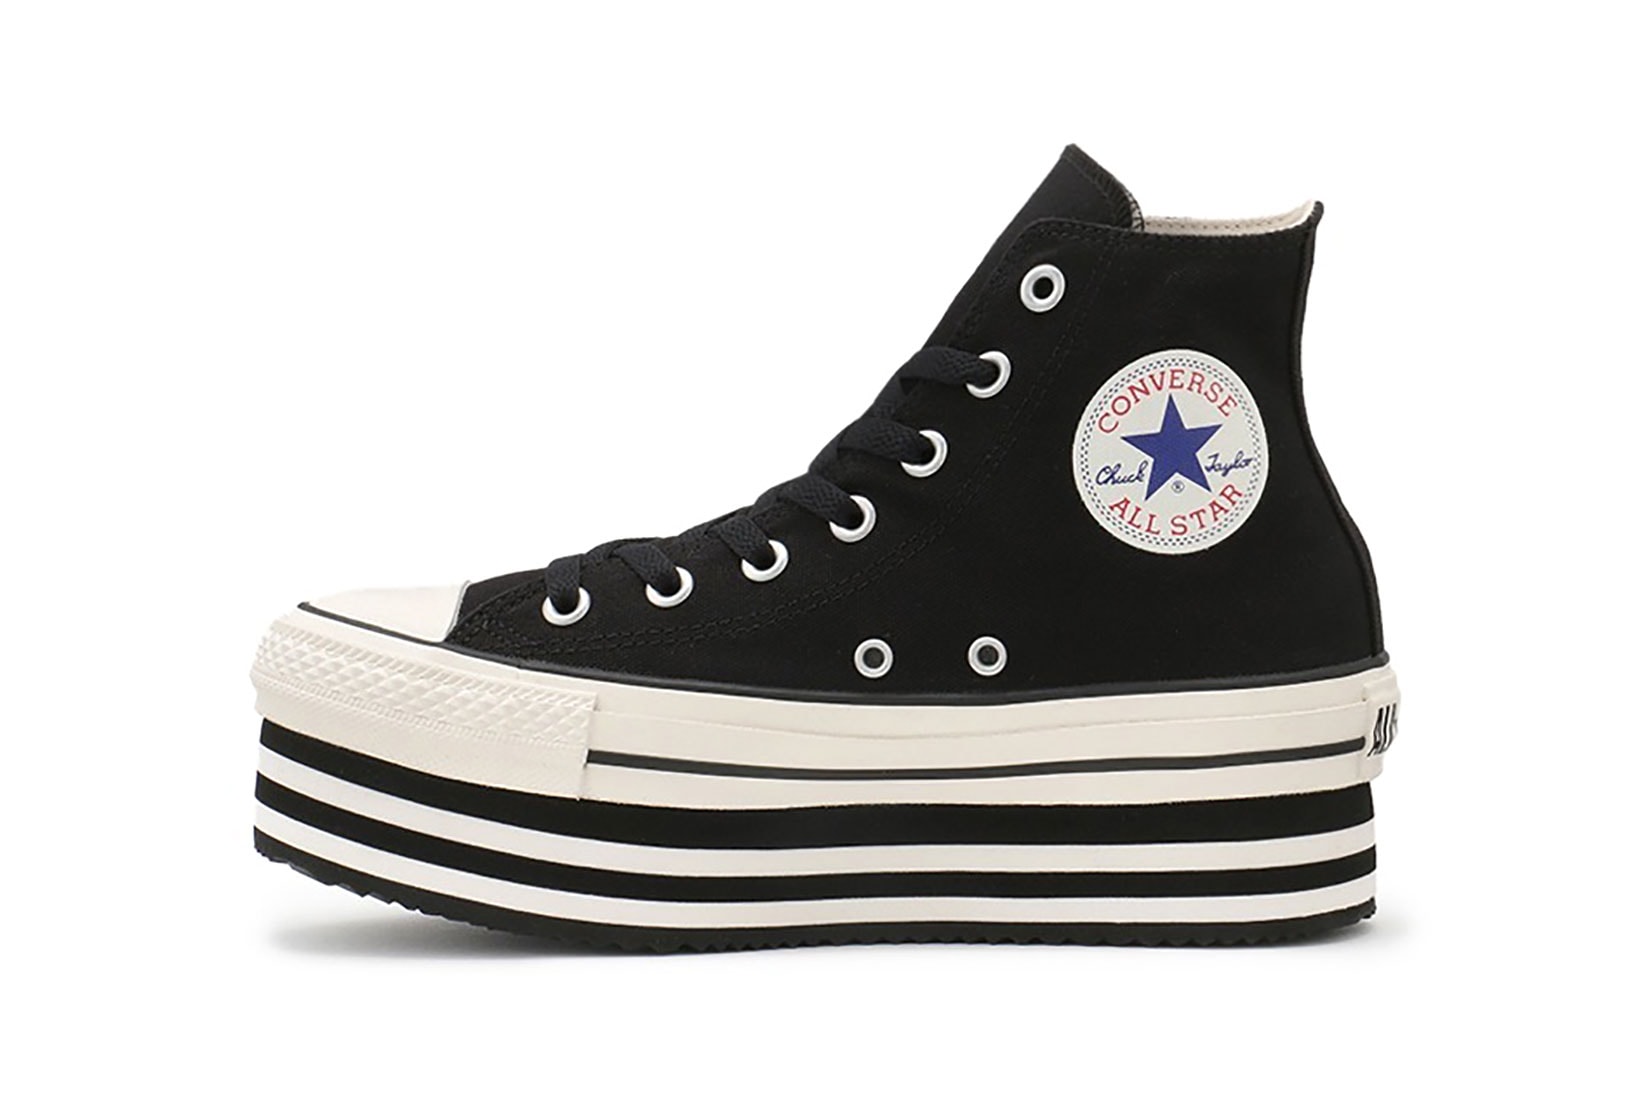 converse all star chunky line hi chuck taylor womens sneakers white black shoes footwear sneakerhead